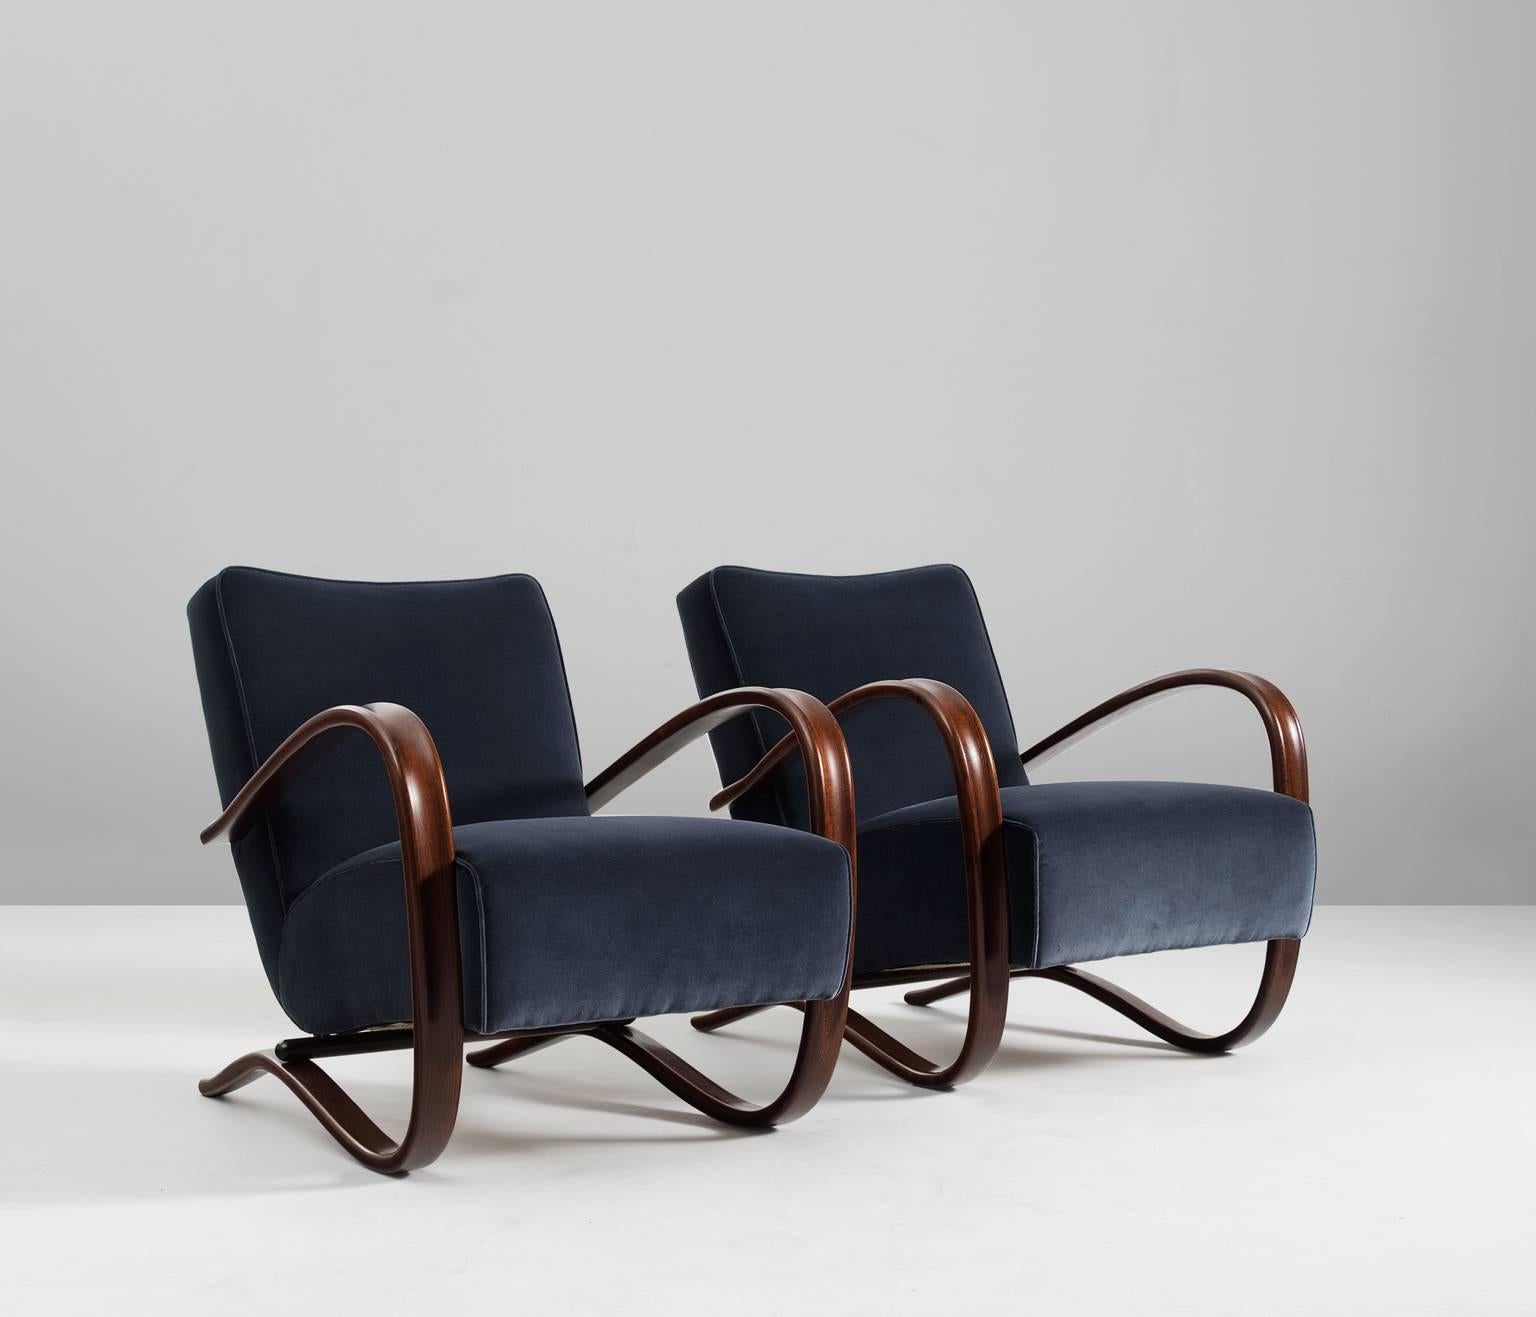 Jindrich Halabala, pair of armchairs, beech and fabric, Czech Republic, 1930s. 

These chairs have a very dynamic appearance, due the curved base that ends fluently in the armrests. The dark brown stained wood nicely combines to the dark blue